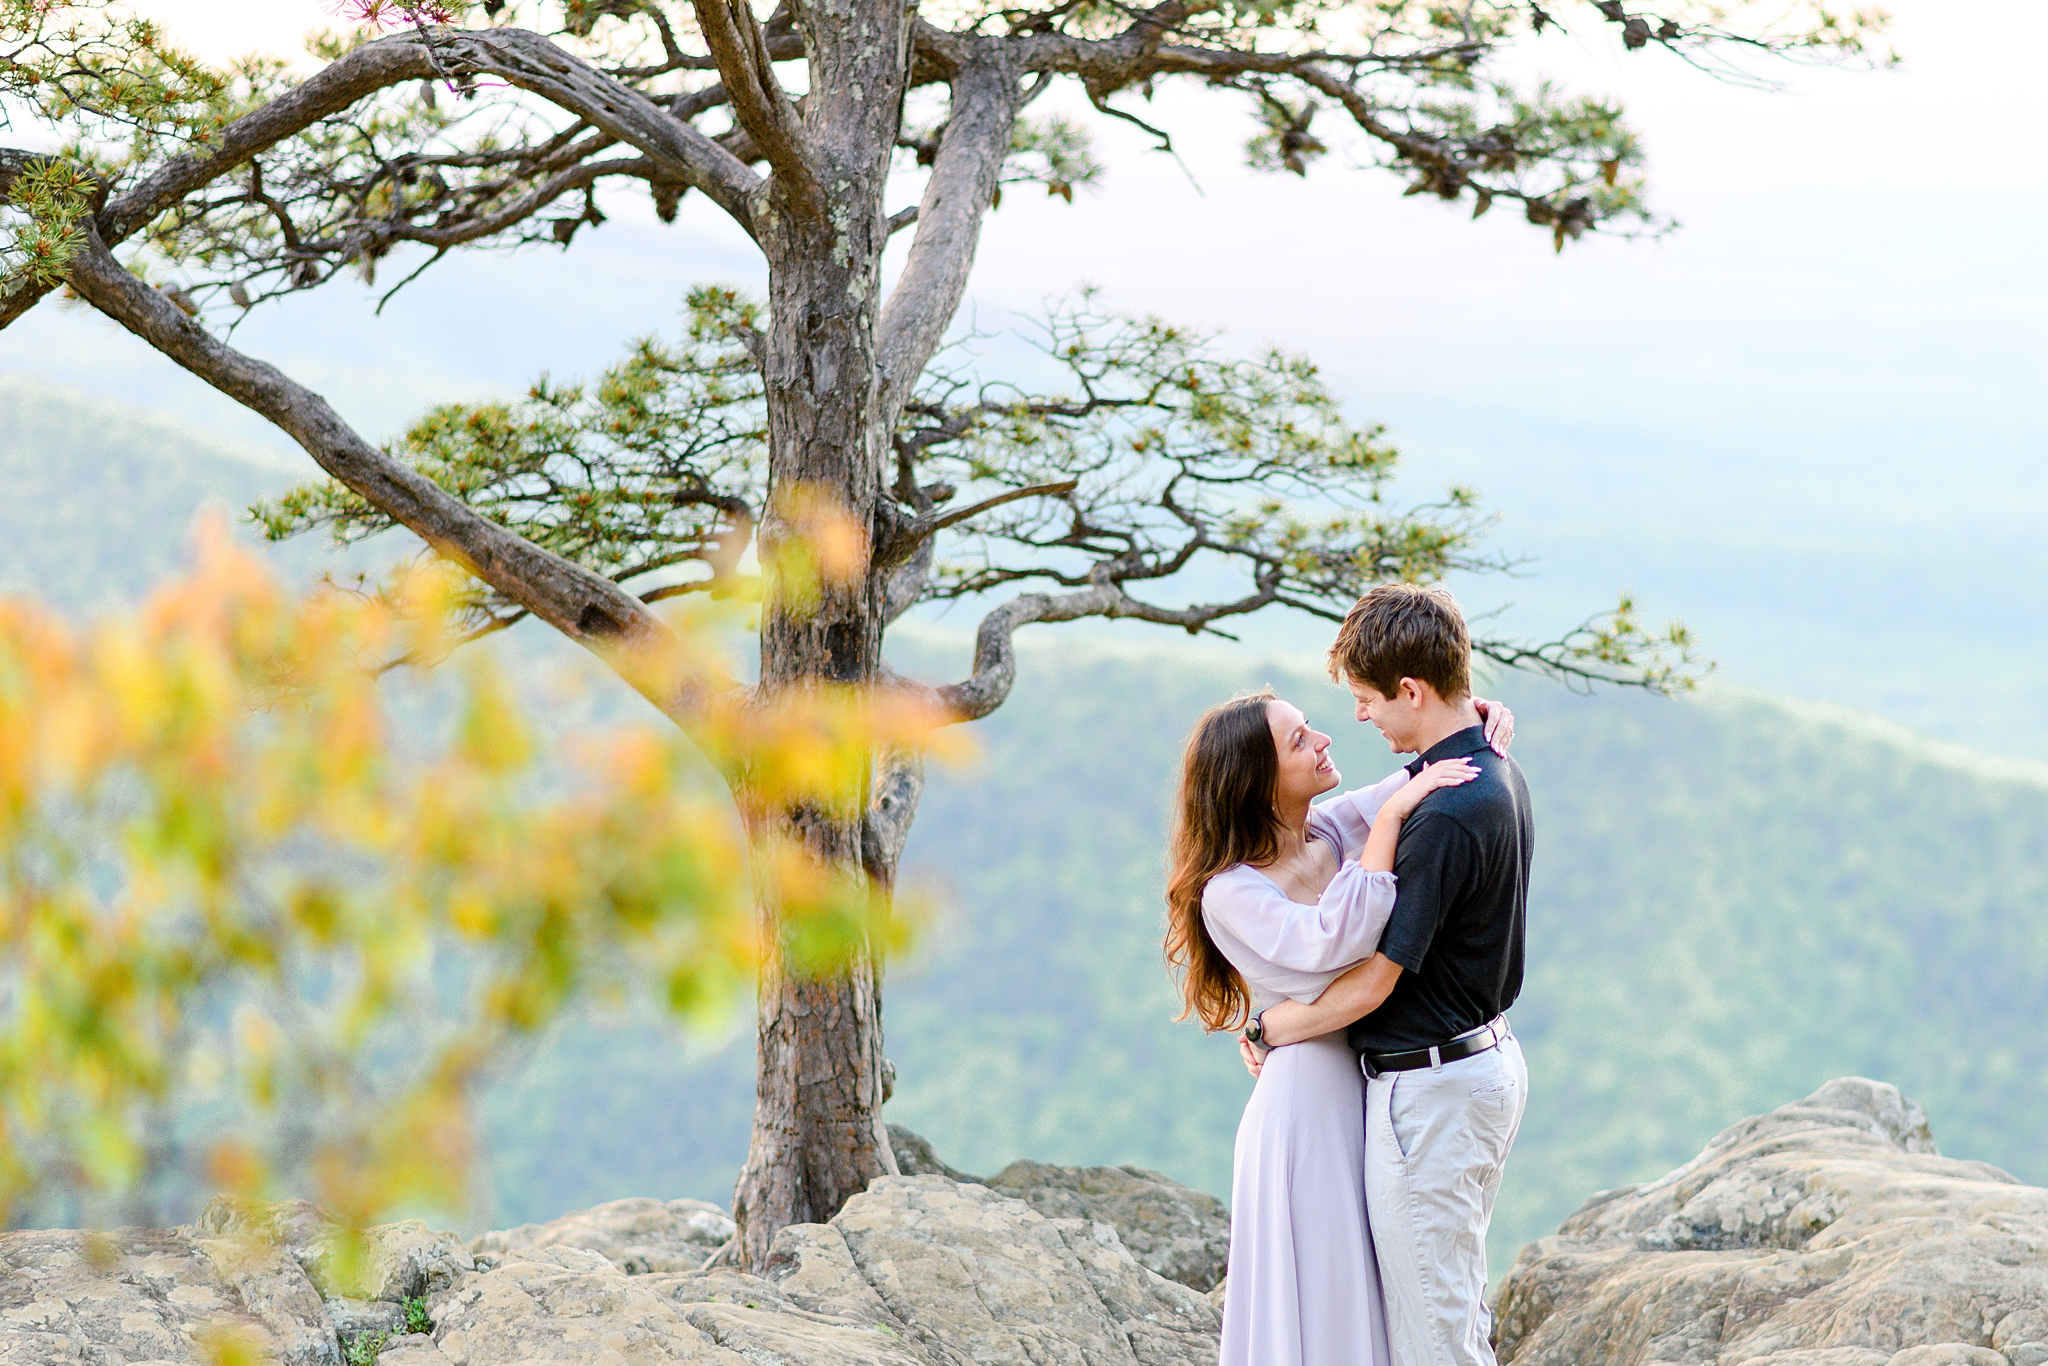 A picture-perfect engagement photo at Ravens Roost Overlook, showcasing the couple's love against the scenic backdrop.